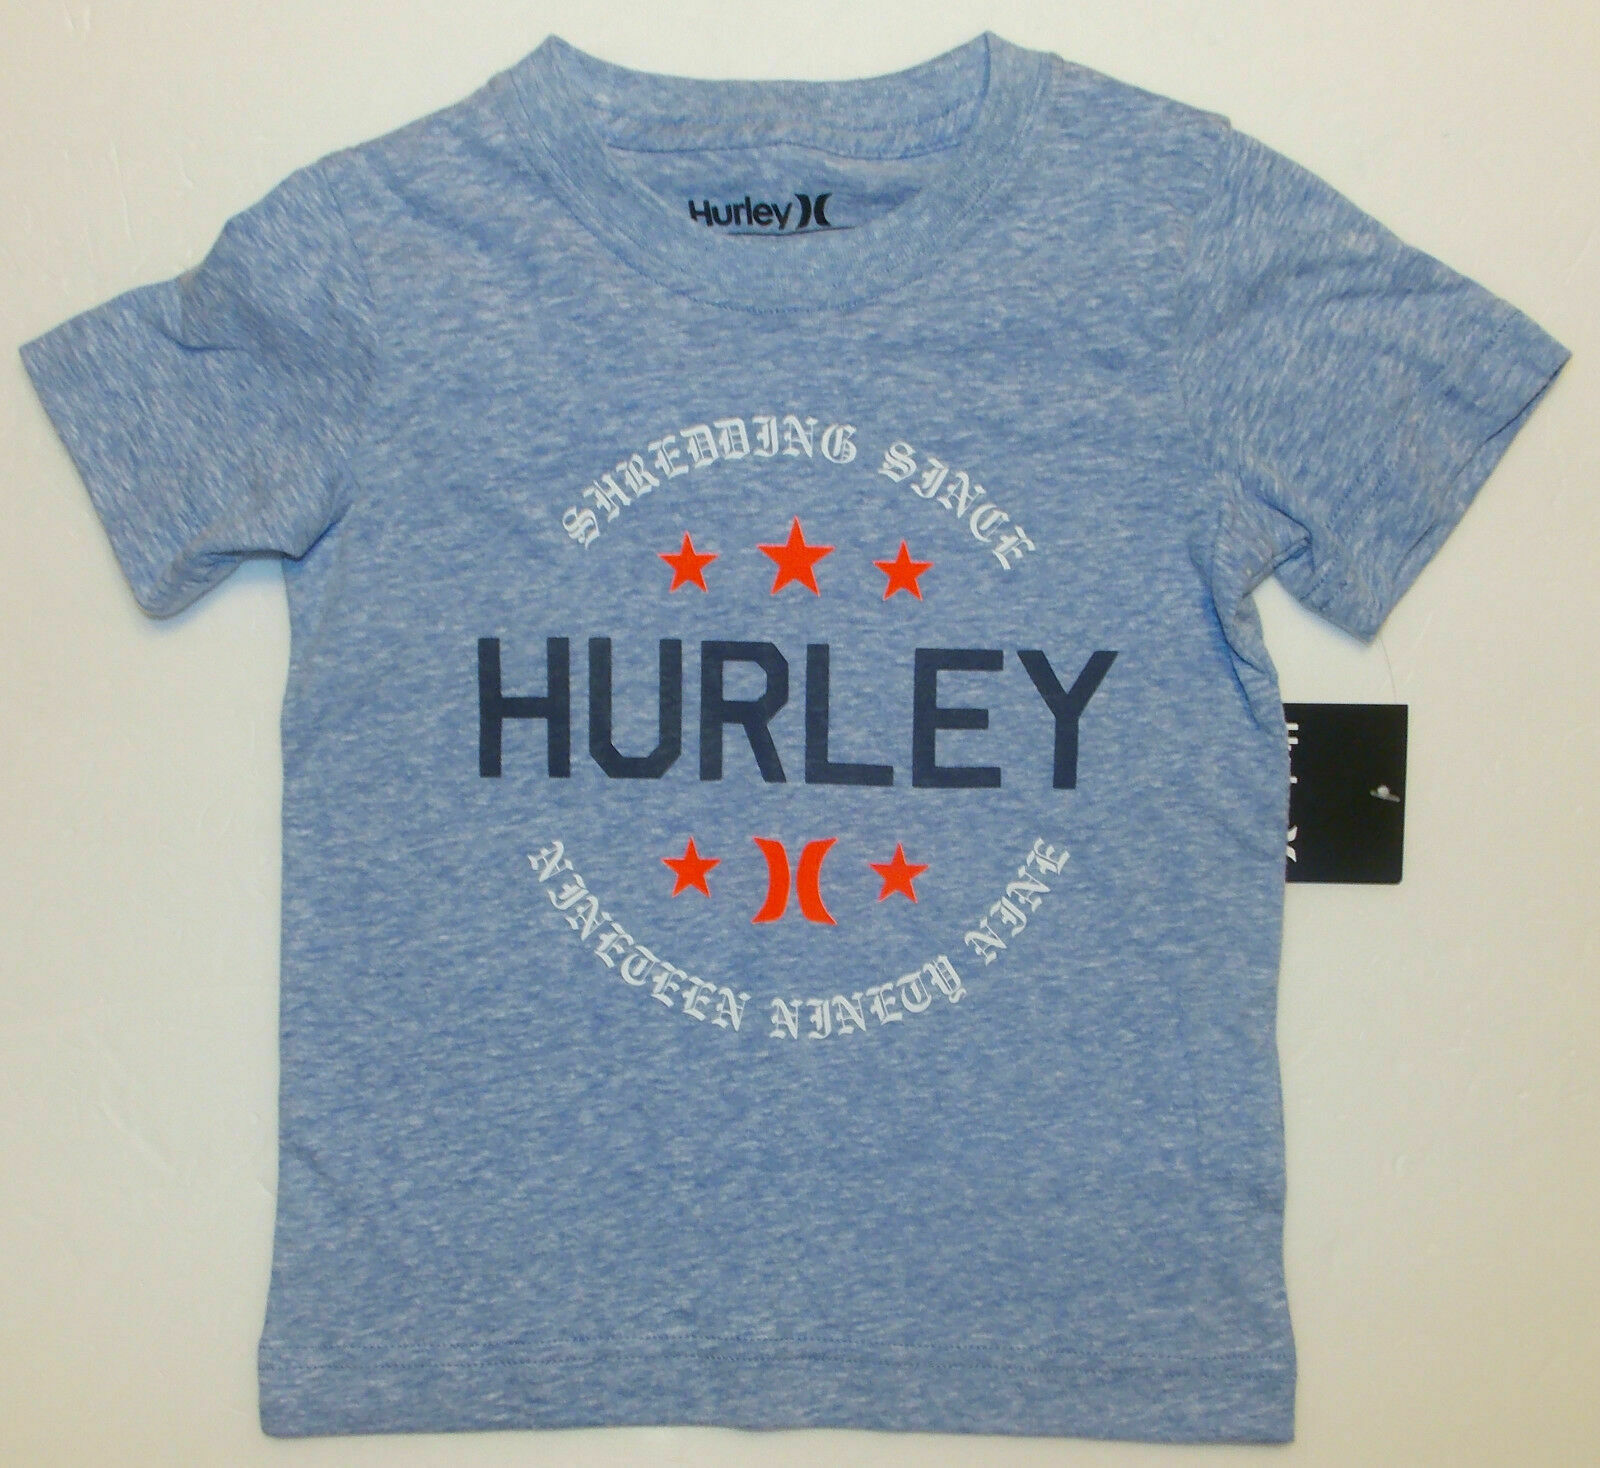 Hurley Boys Blue T-Shirts Sizes 4, 6 and 7 NWT  - $15.88 - $16.82